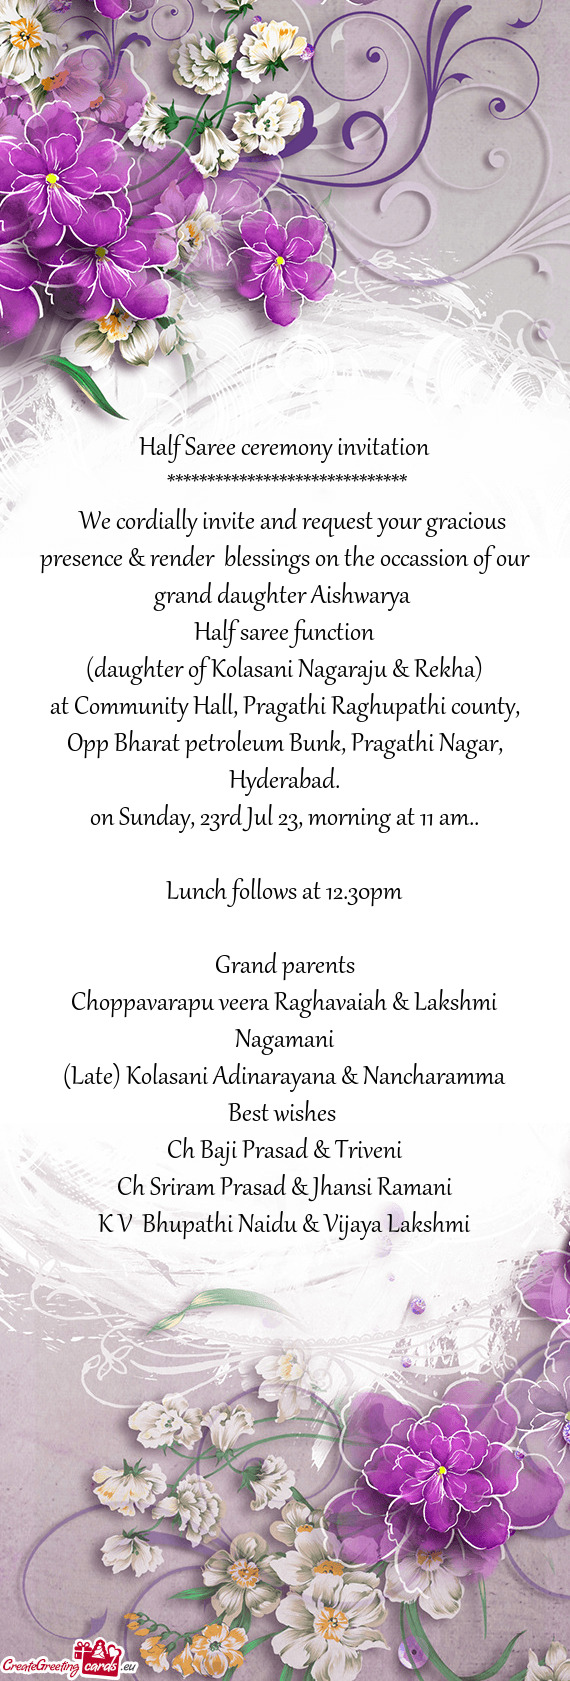 We cordially invite and request your gracious presence & render blessings on the occassion of ou